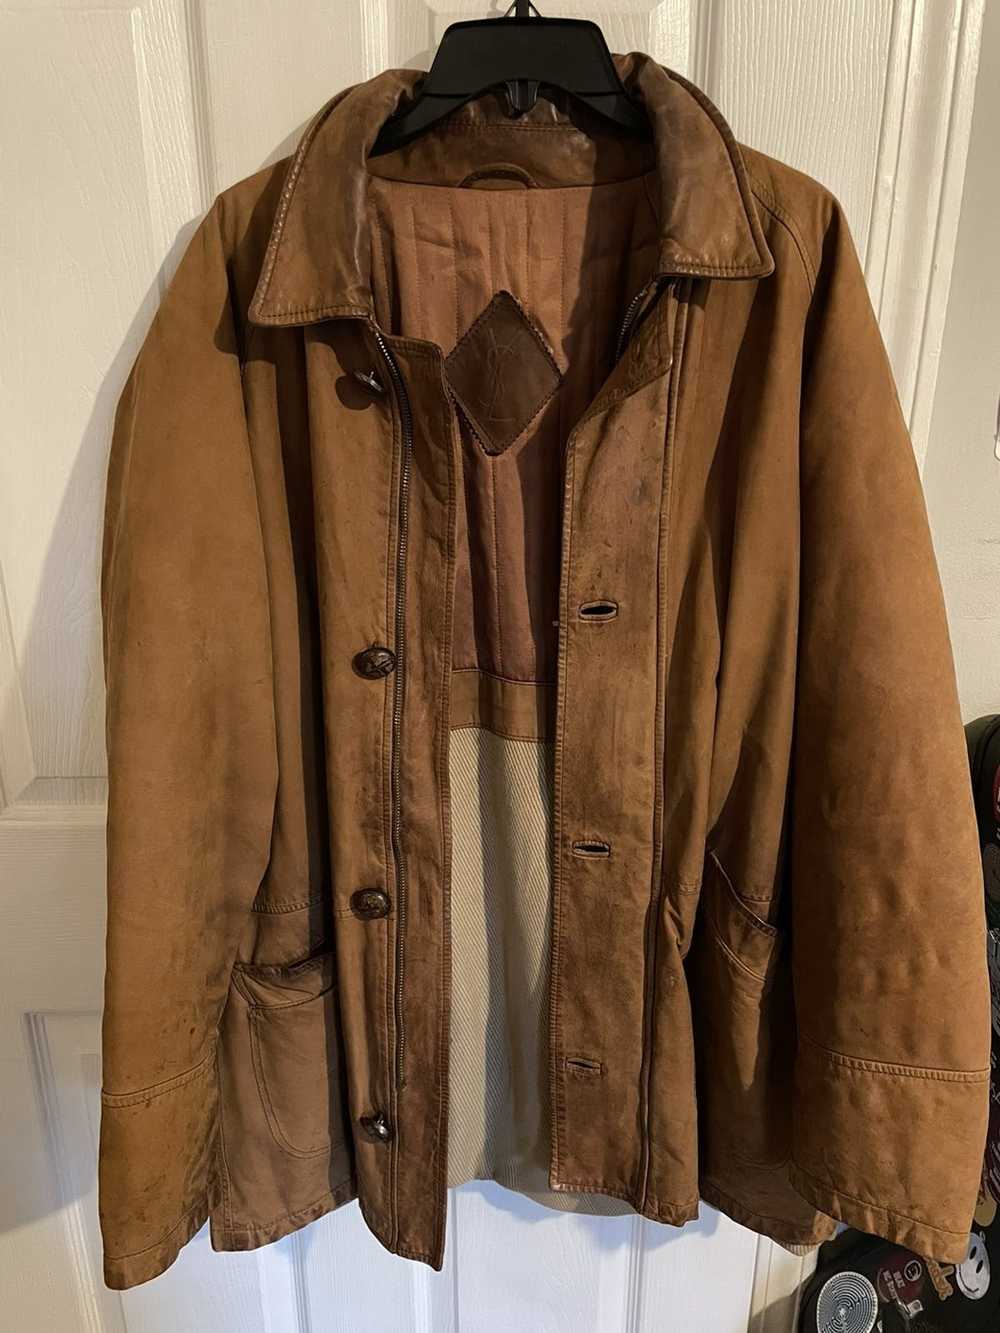 Ysl Pour Homme Light Brown YSL Leather Jacket - image 1